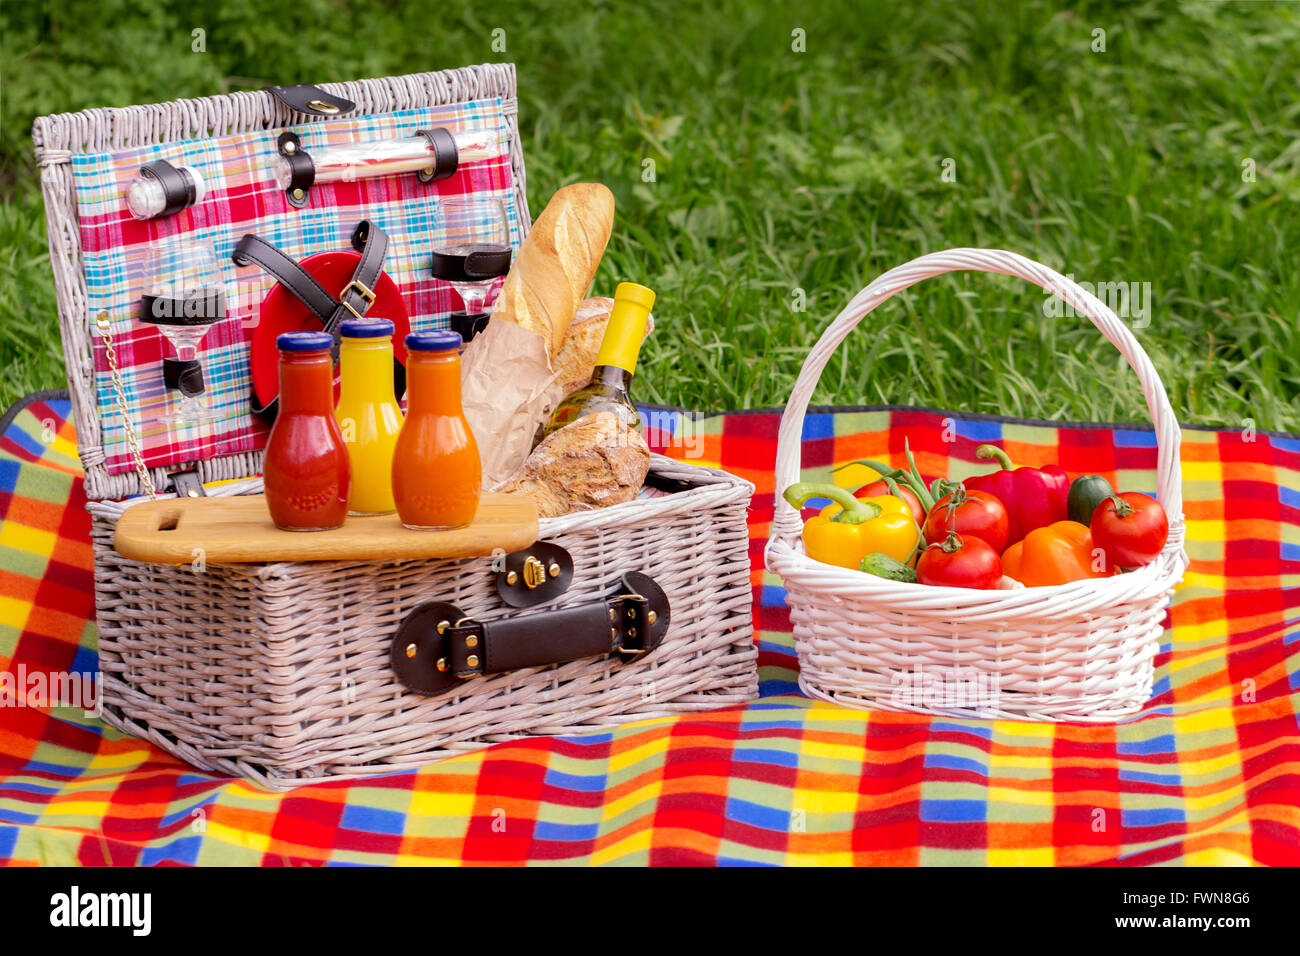 Picnic on the grass. Picnic basket with vegetables and bread. A bottle of wine and bottles of juice. Stock Photo